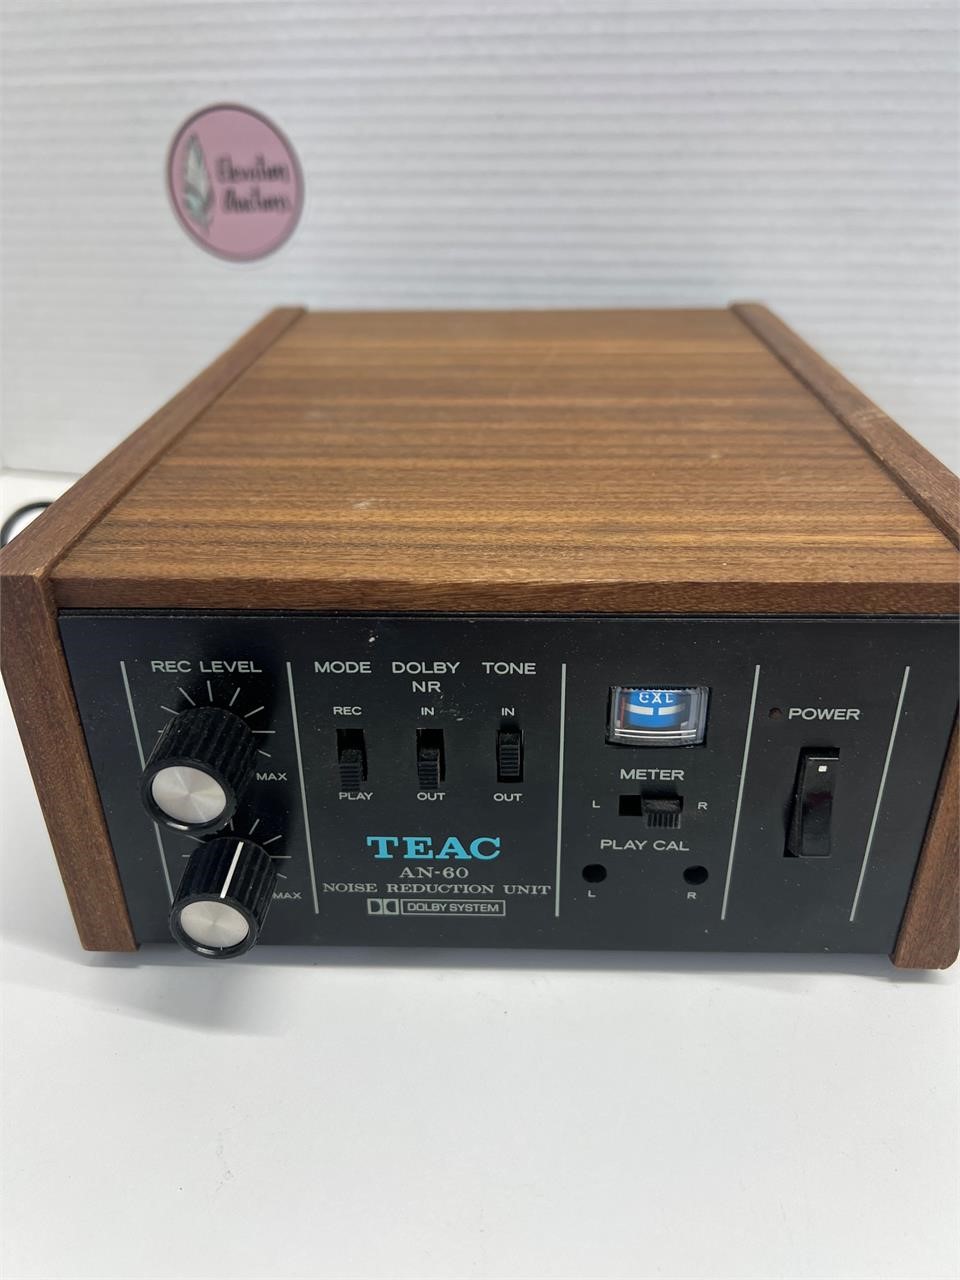 TEAC AN-60 Noise Reduction Unit - Untested